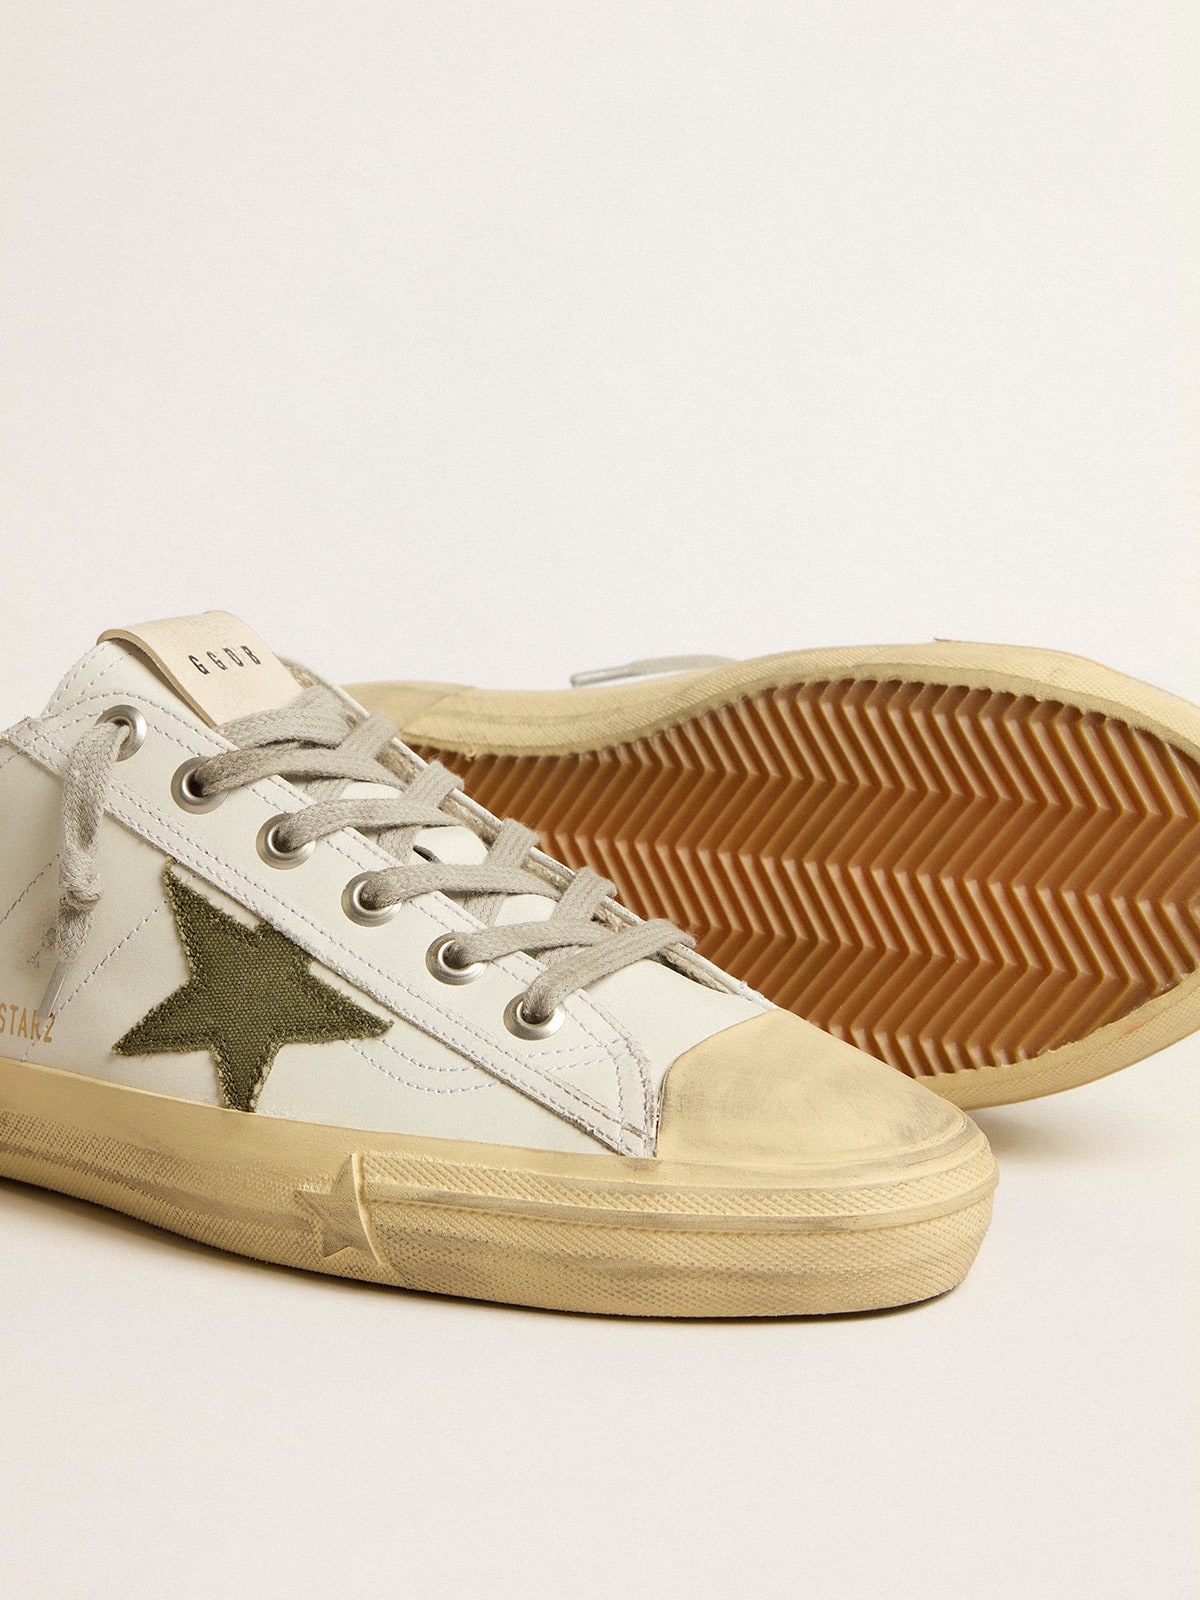 Men's V-Star in white leather with green canvas star